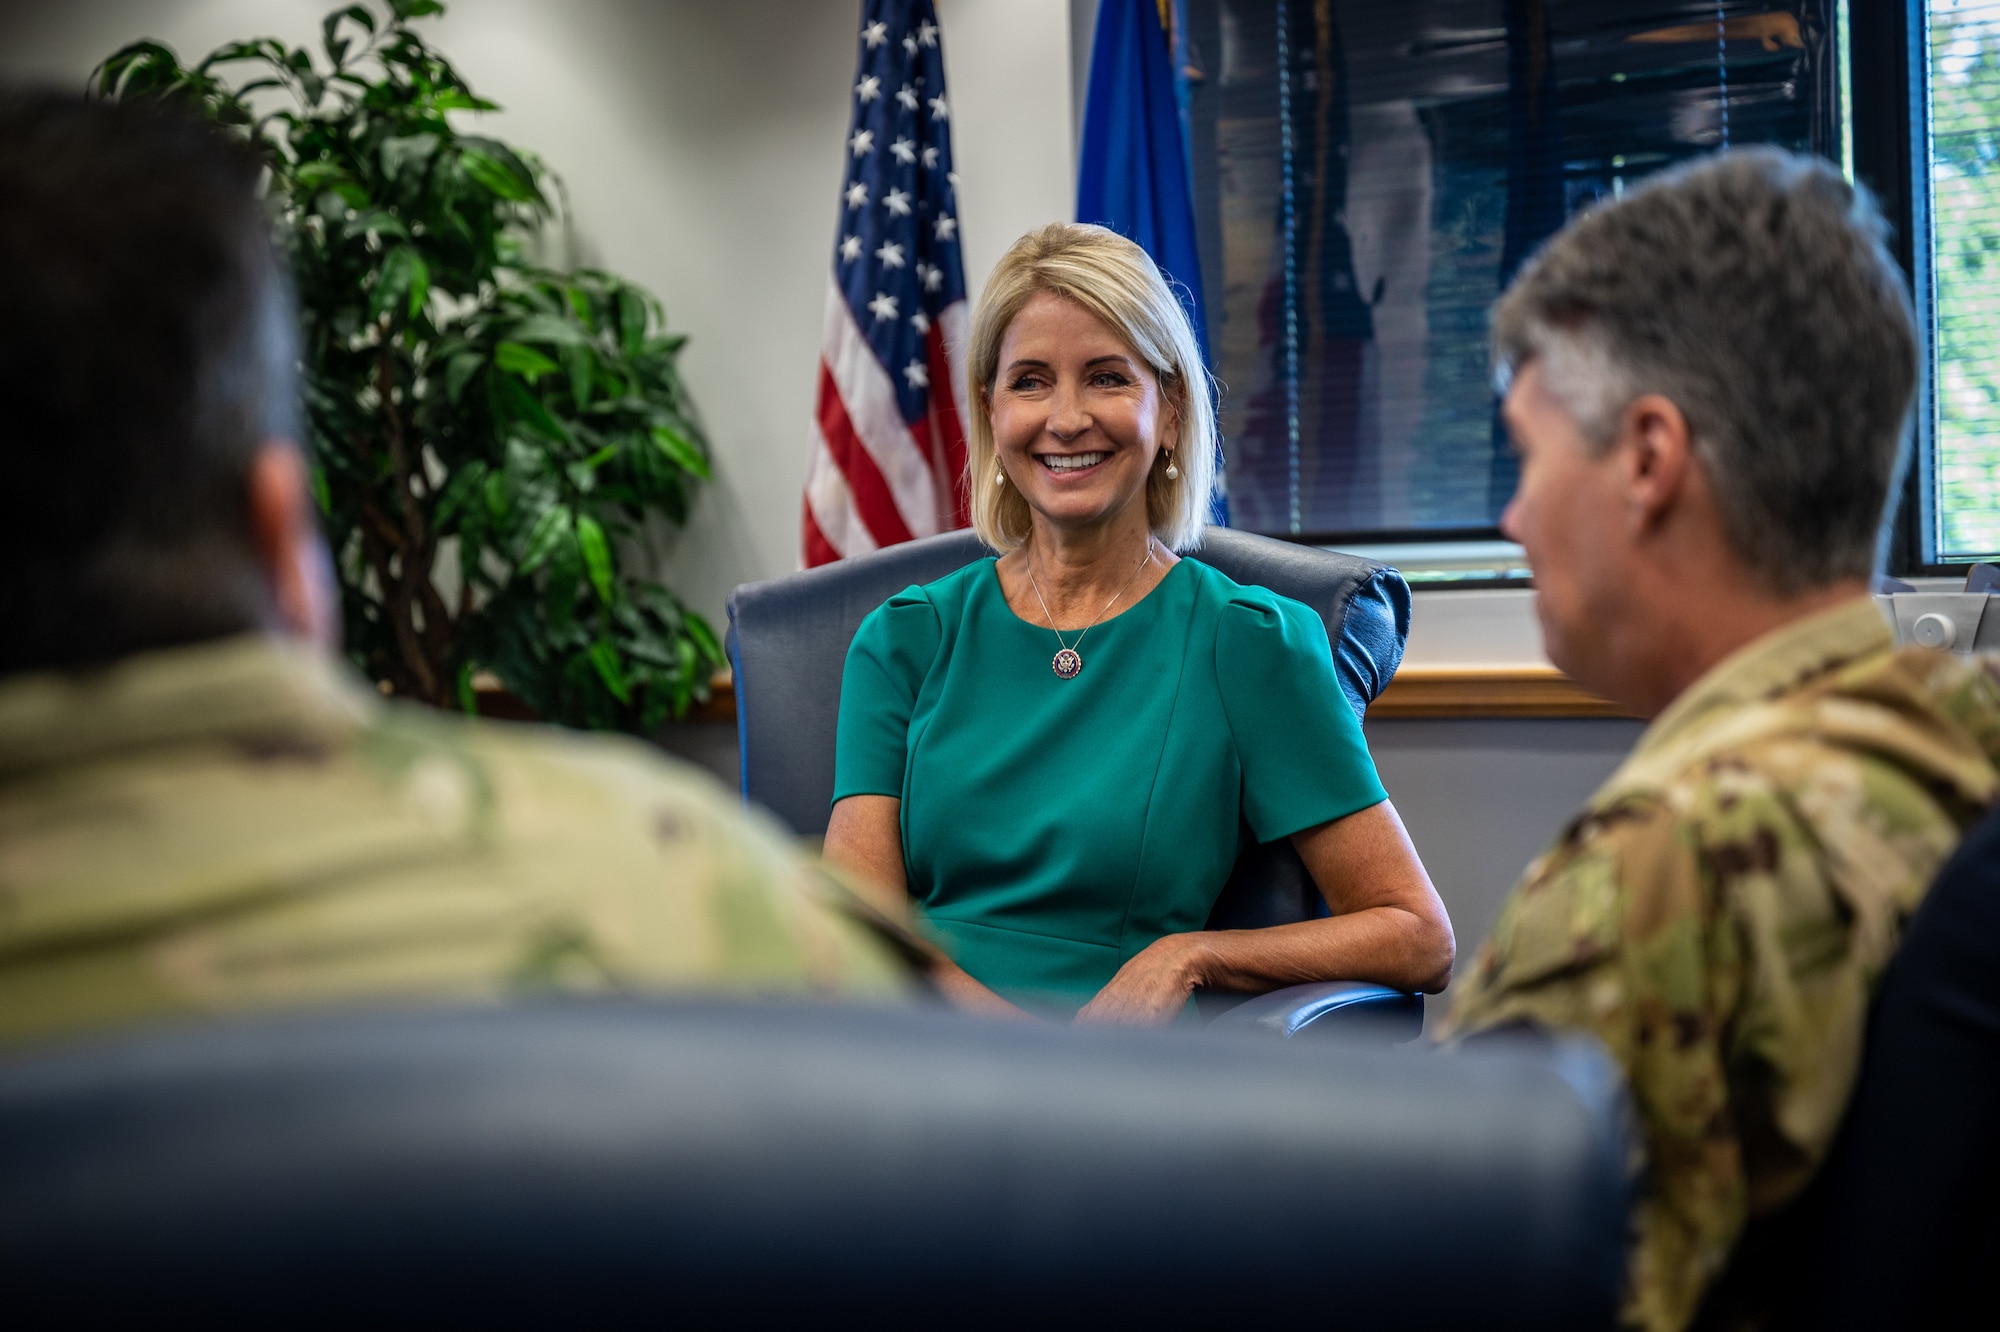 U.S. Congresswoman (R-IL) Mary Miller along with members of her staff, William Wadsworth, Deputy Chief of Staff, and Patrick Farrell, District Director, meet with Col. Rick Chadwick, 932nd Airlift Wing commander, Chief Master Sgt. Christian Biancur, 932nd AW command chief, and 932nd AW group representatives during Miller’s first visit to Scott Air Force Base and the 932nd AW, Aug. 28, 2023. “I had the honor of visiting the 932nd Airlift Wing at Scott Air Force Base this week,” said Miller. “I appreciated the opportunity to learn more about the Wing and its importance to the Air Force's mission, and the local community in Illinois.” (U.S. Air Force photo by Christopher Parr)